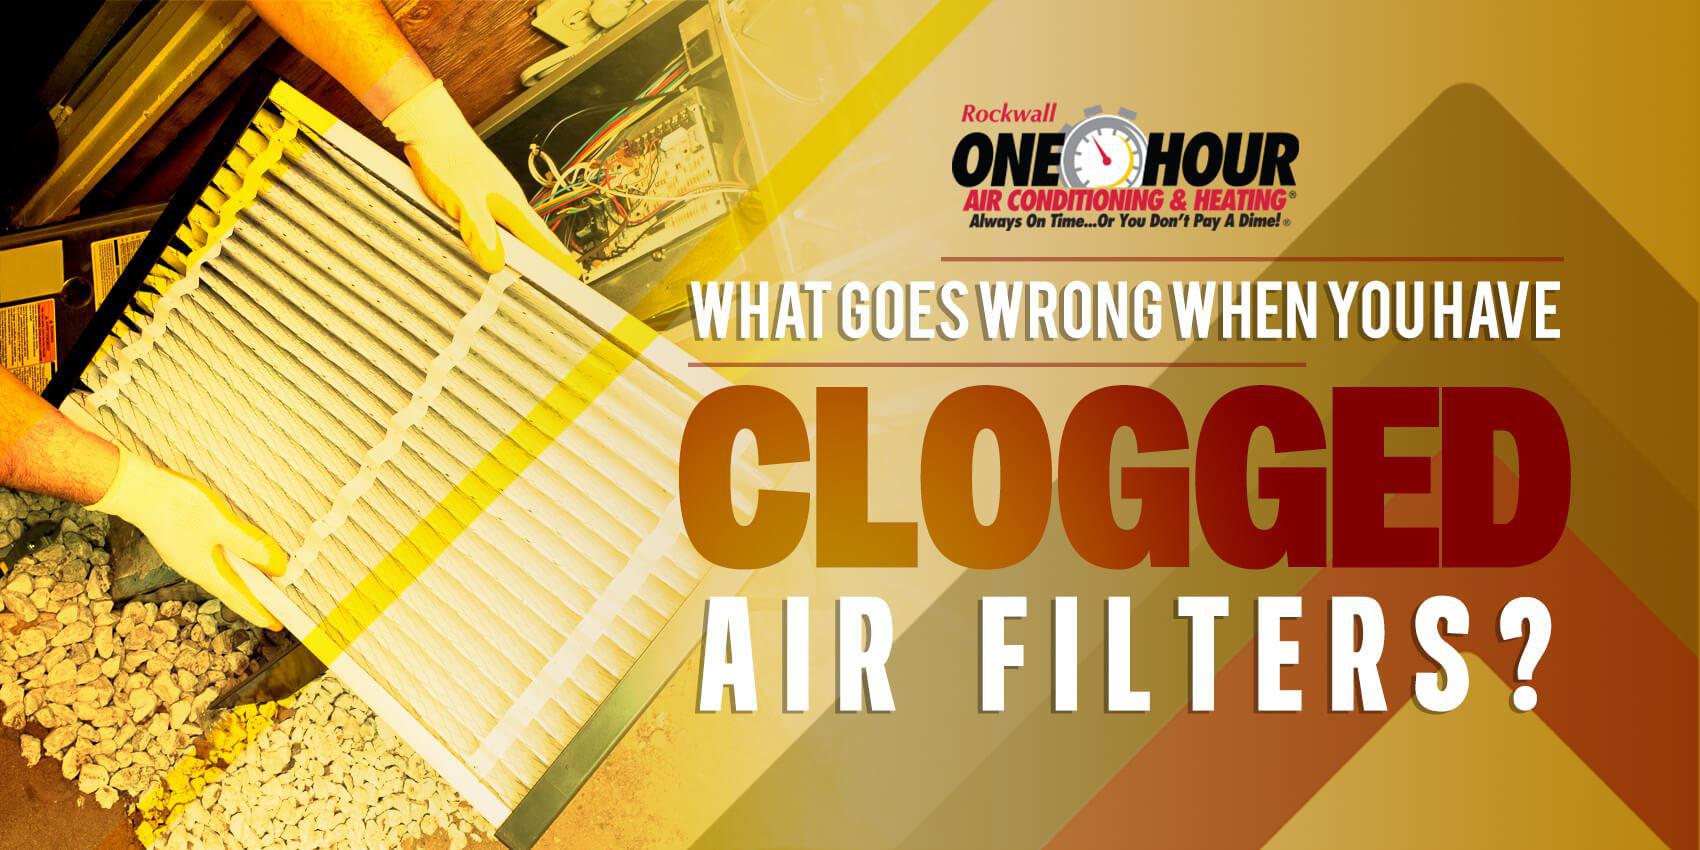 What Goes Wrong When You Have Clogged Air Filters?